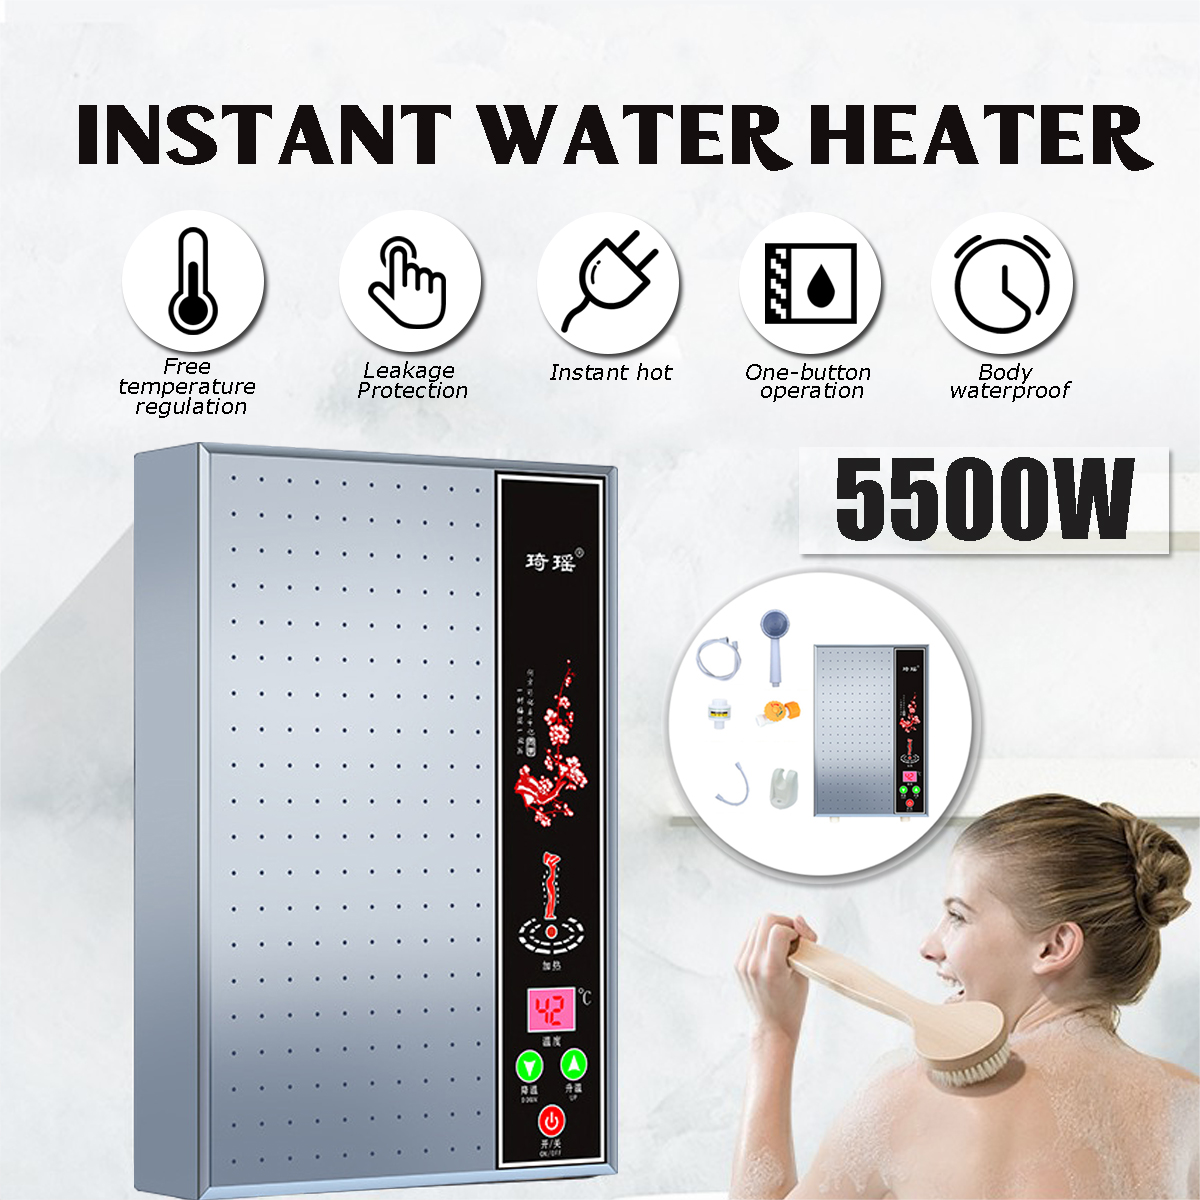 

5500W 220V Tankless Water Heater Instant Electric 3s Hot Water Boiler Shower Set